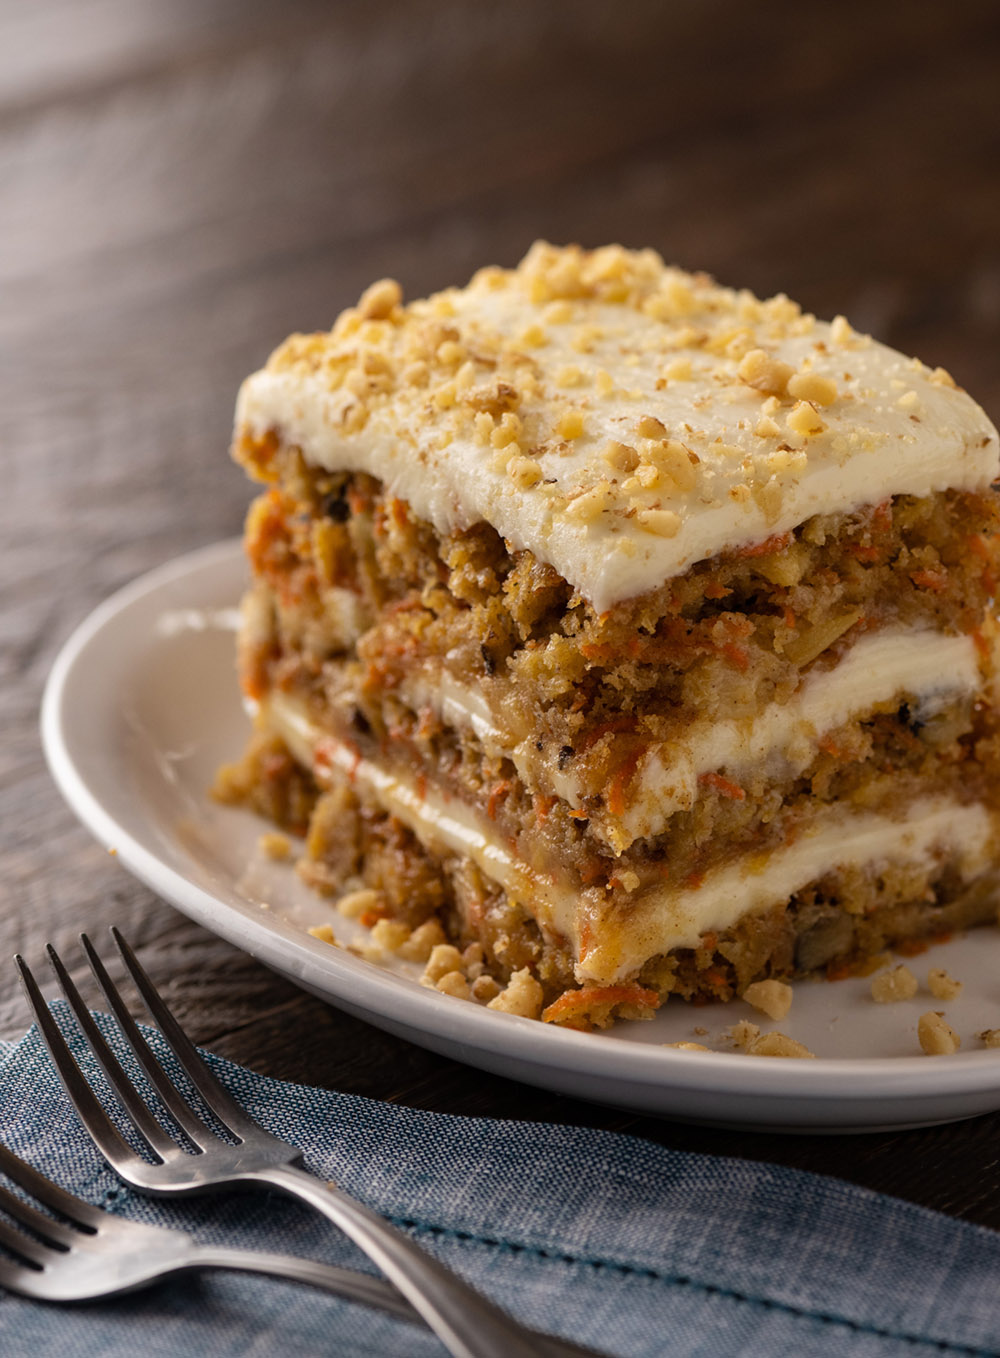 Our Family Recipe Carrot Cake